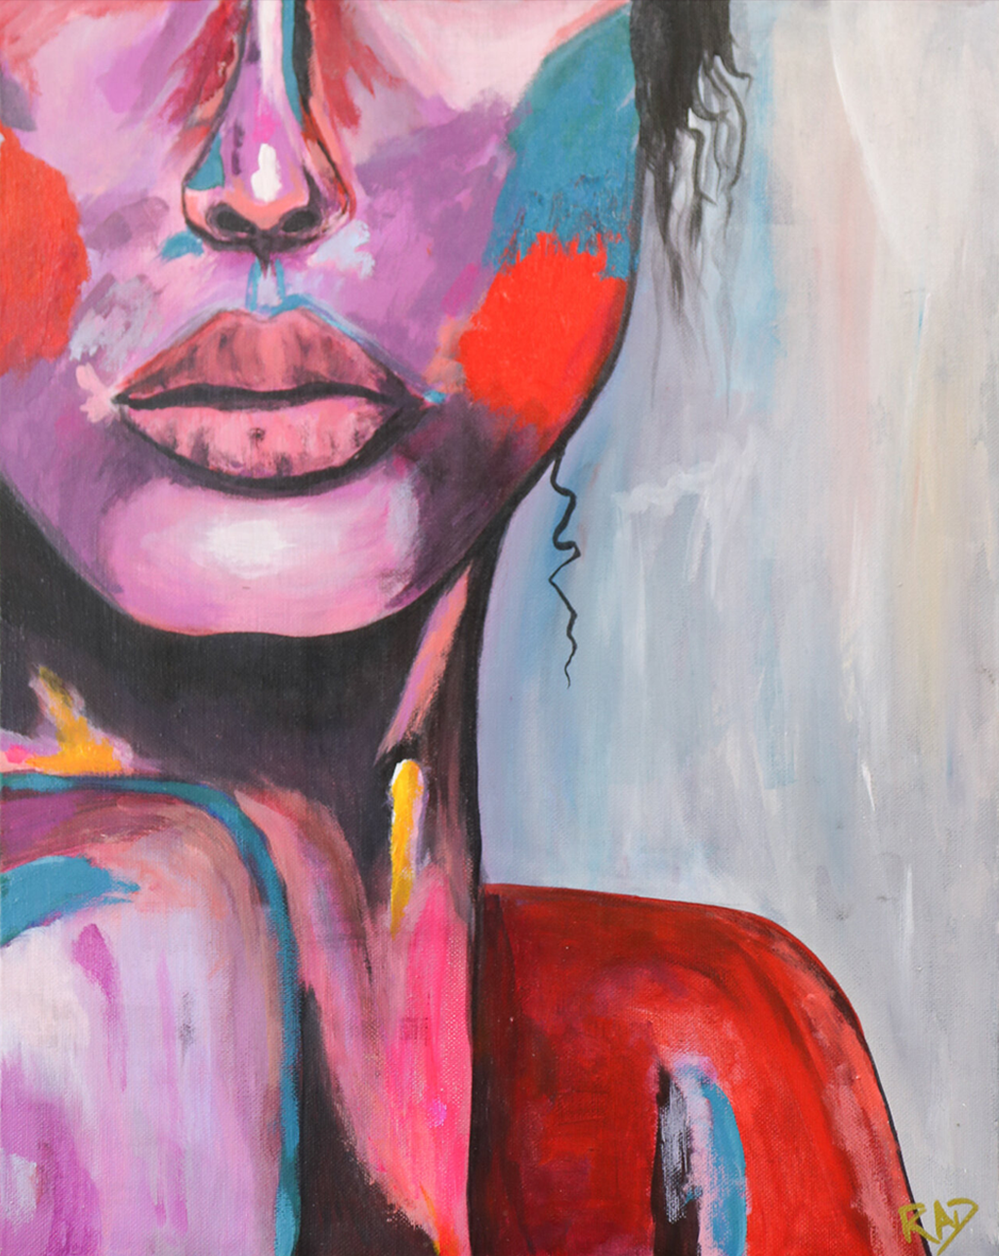 A painting of the lower face, neck, and shoulder of a woman in pink, red, and blue, almost like a modern Fauvist painting.